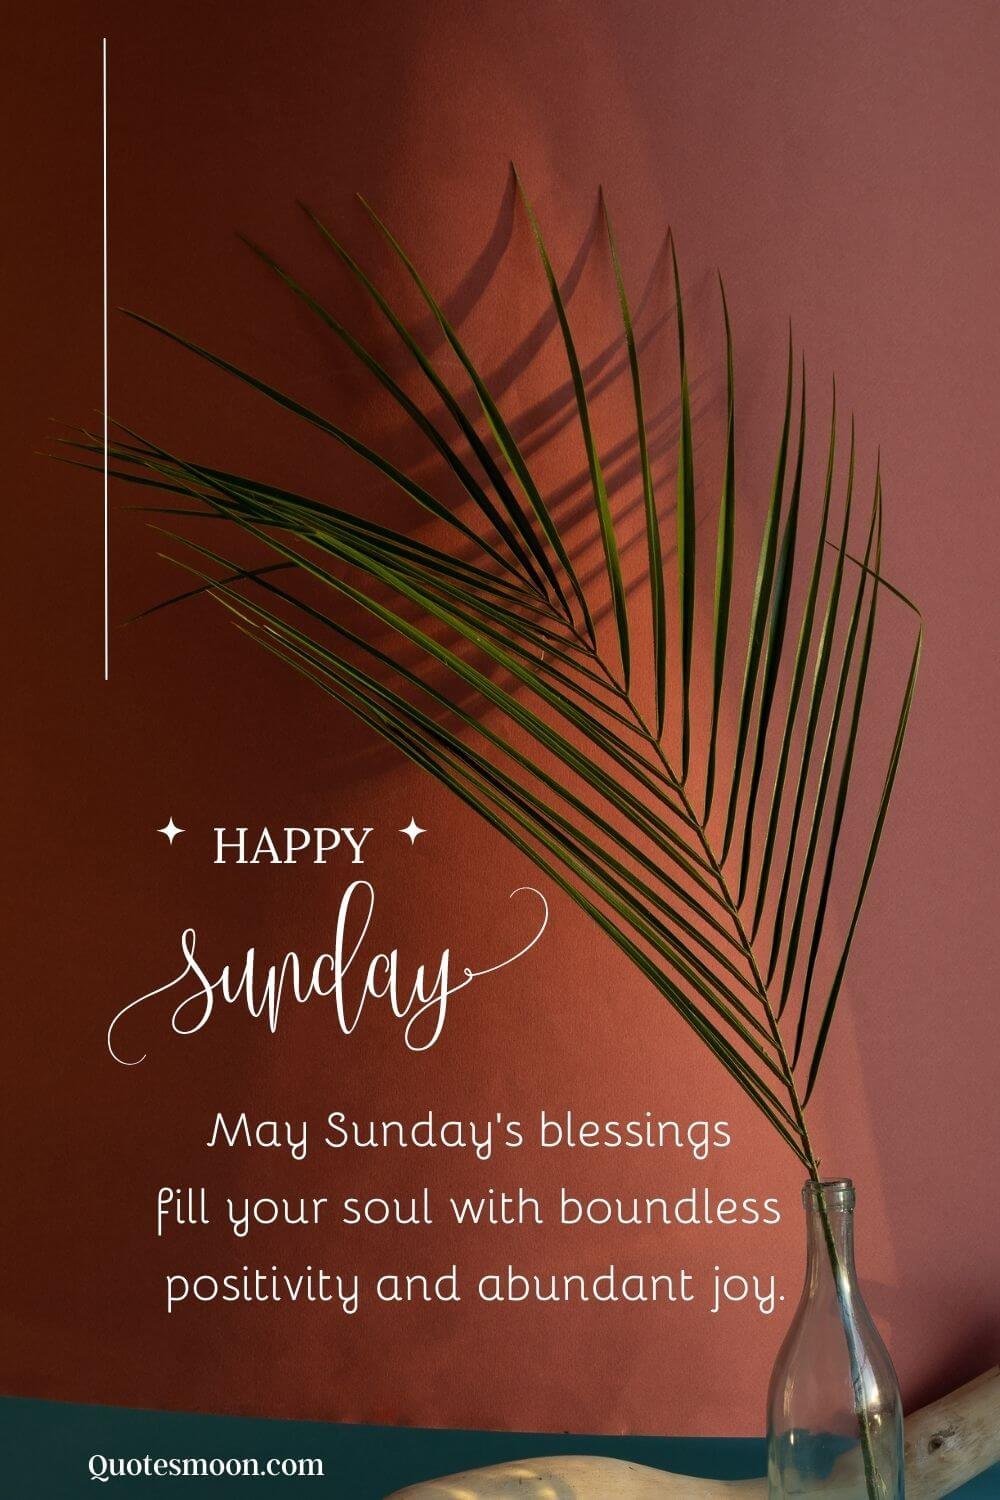 sunday blessings that light up positivity and joy